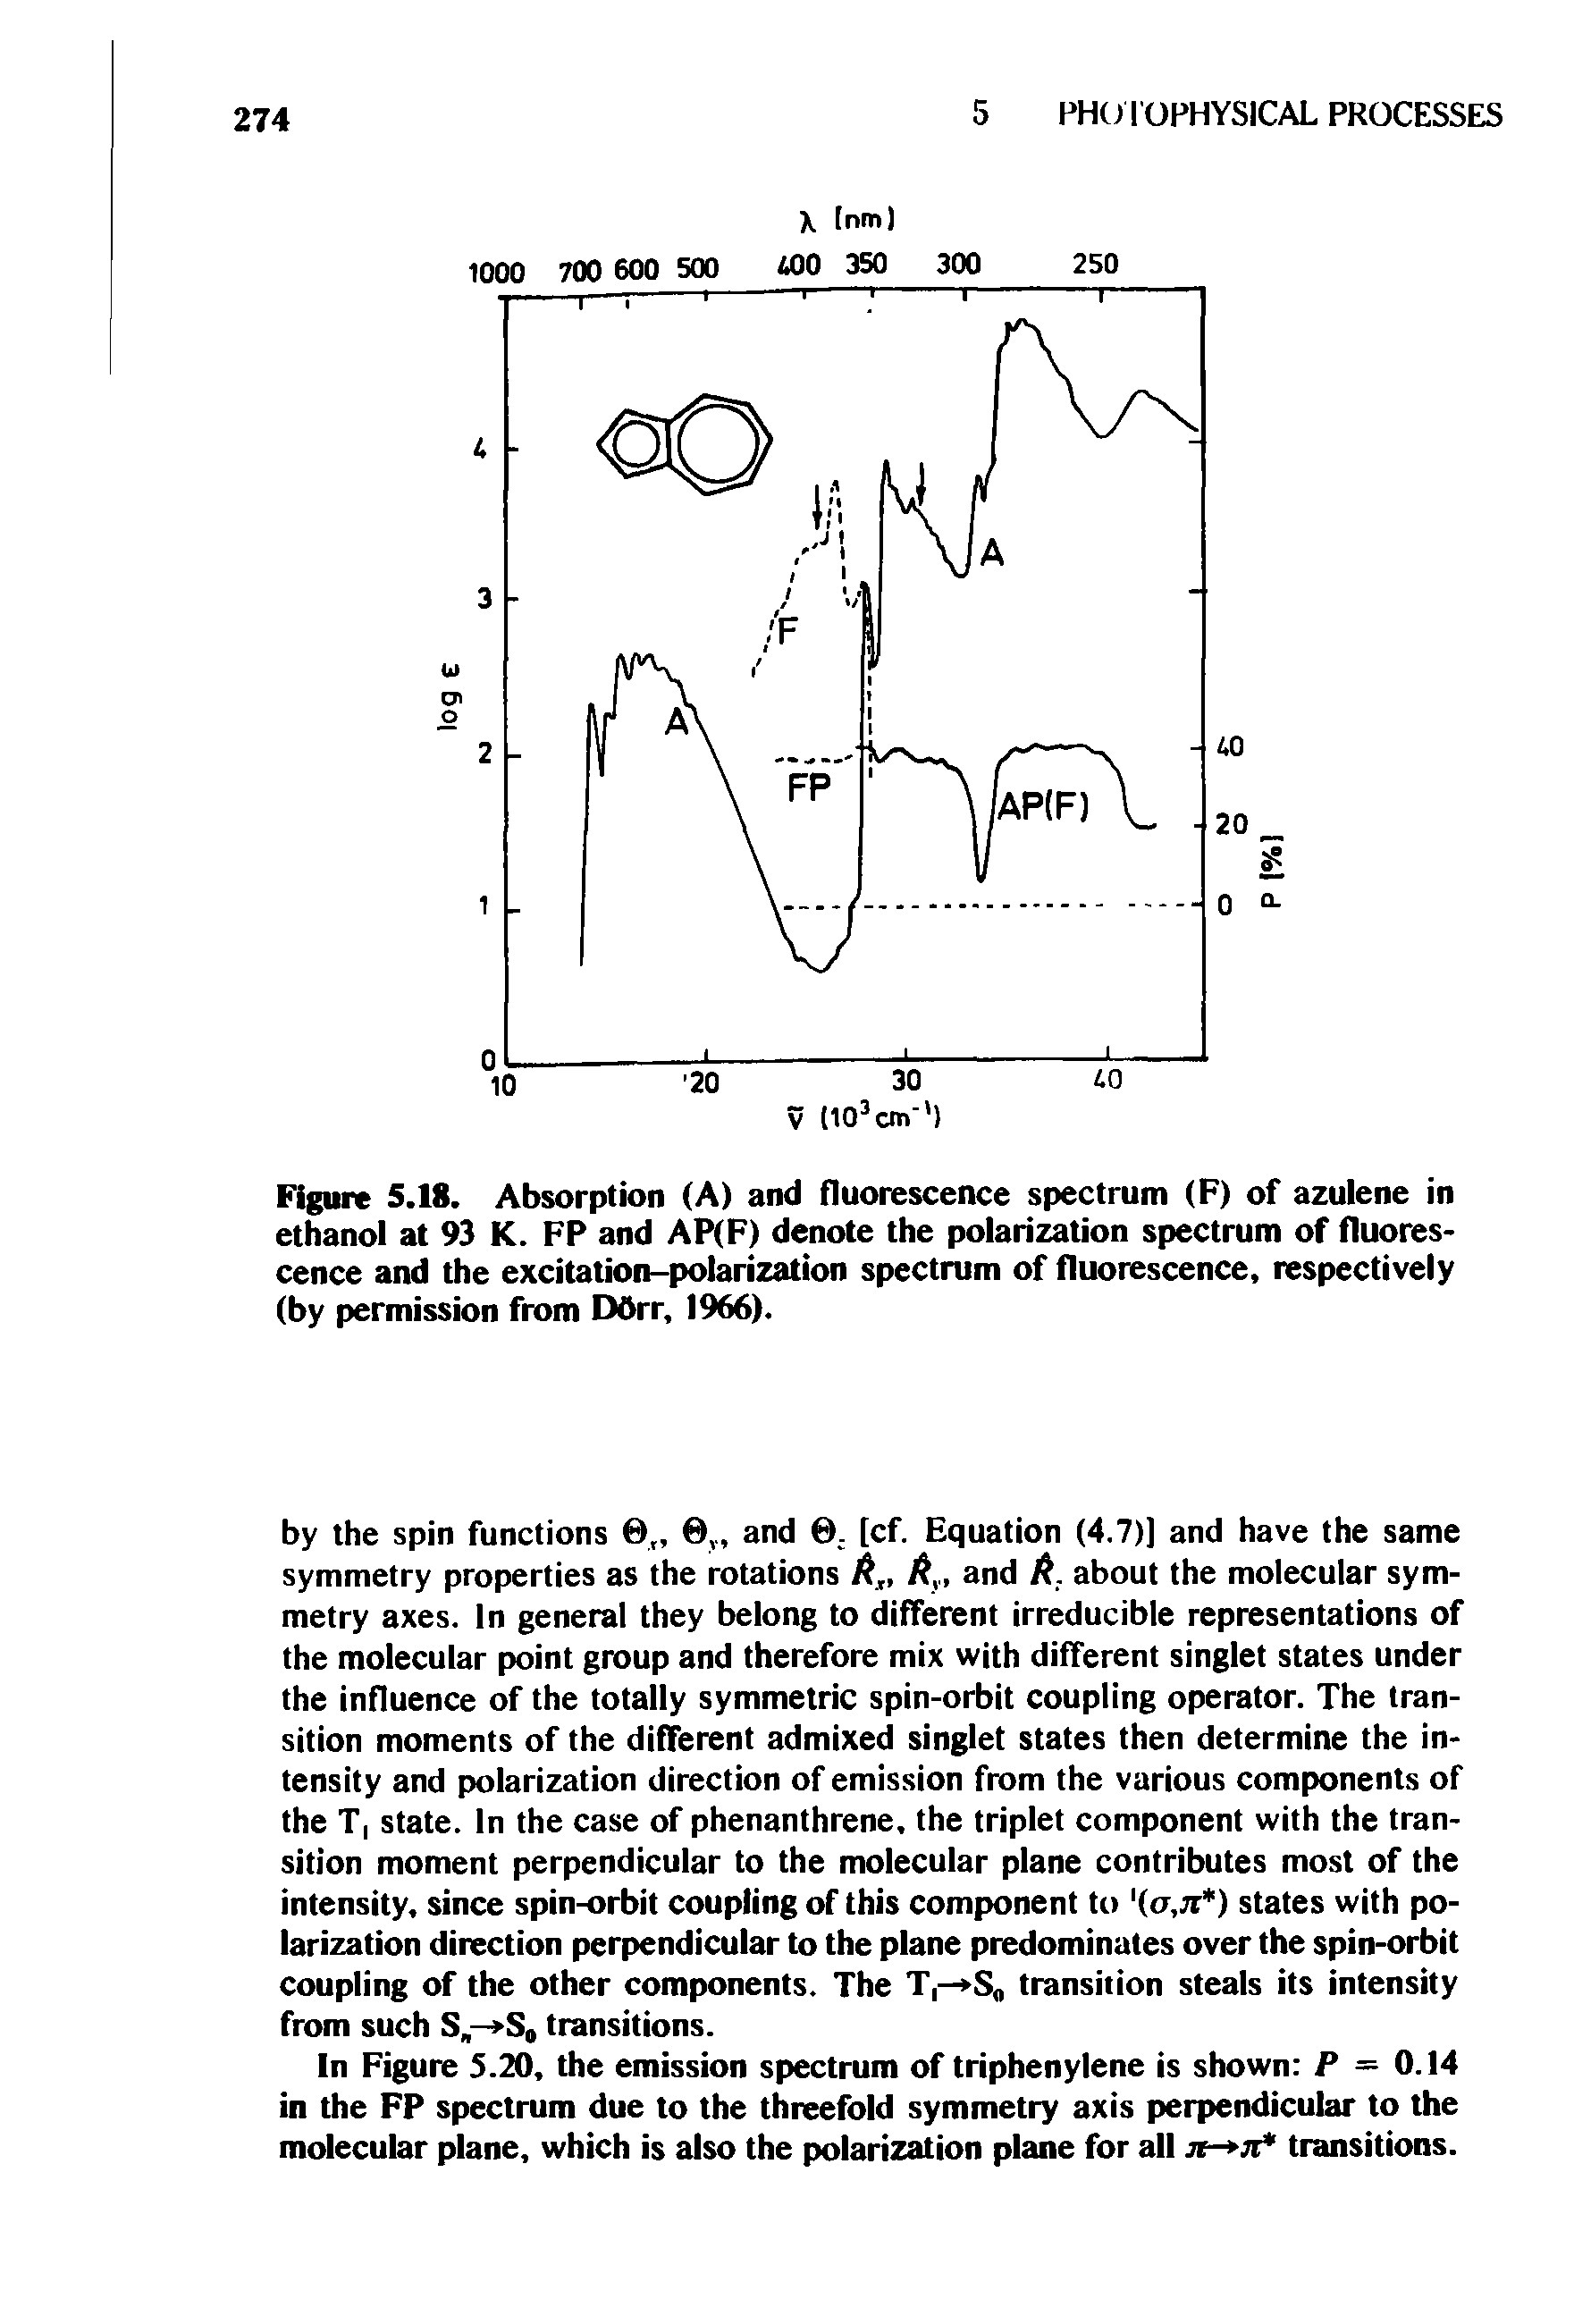 Figure 5.18. Absorption (A) and fluorescence spectrum (P) of azulene in ethanol at 93 K. FP and AP(P) denote the polarization spectrum of fluorescence and the excitation-polarization spectrum of fluorescence, respectively (by permission from Ddrr, 1966).